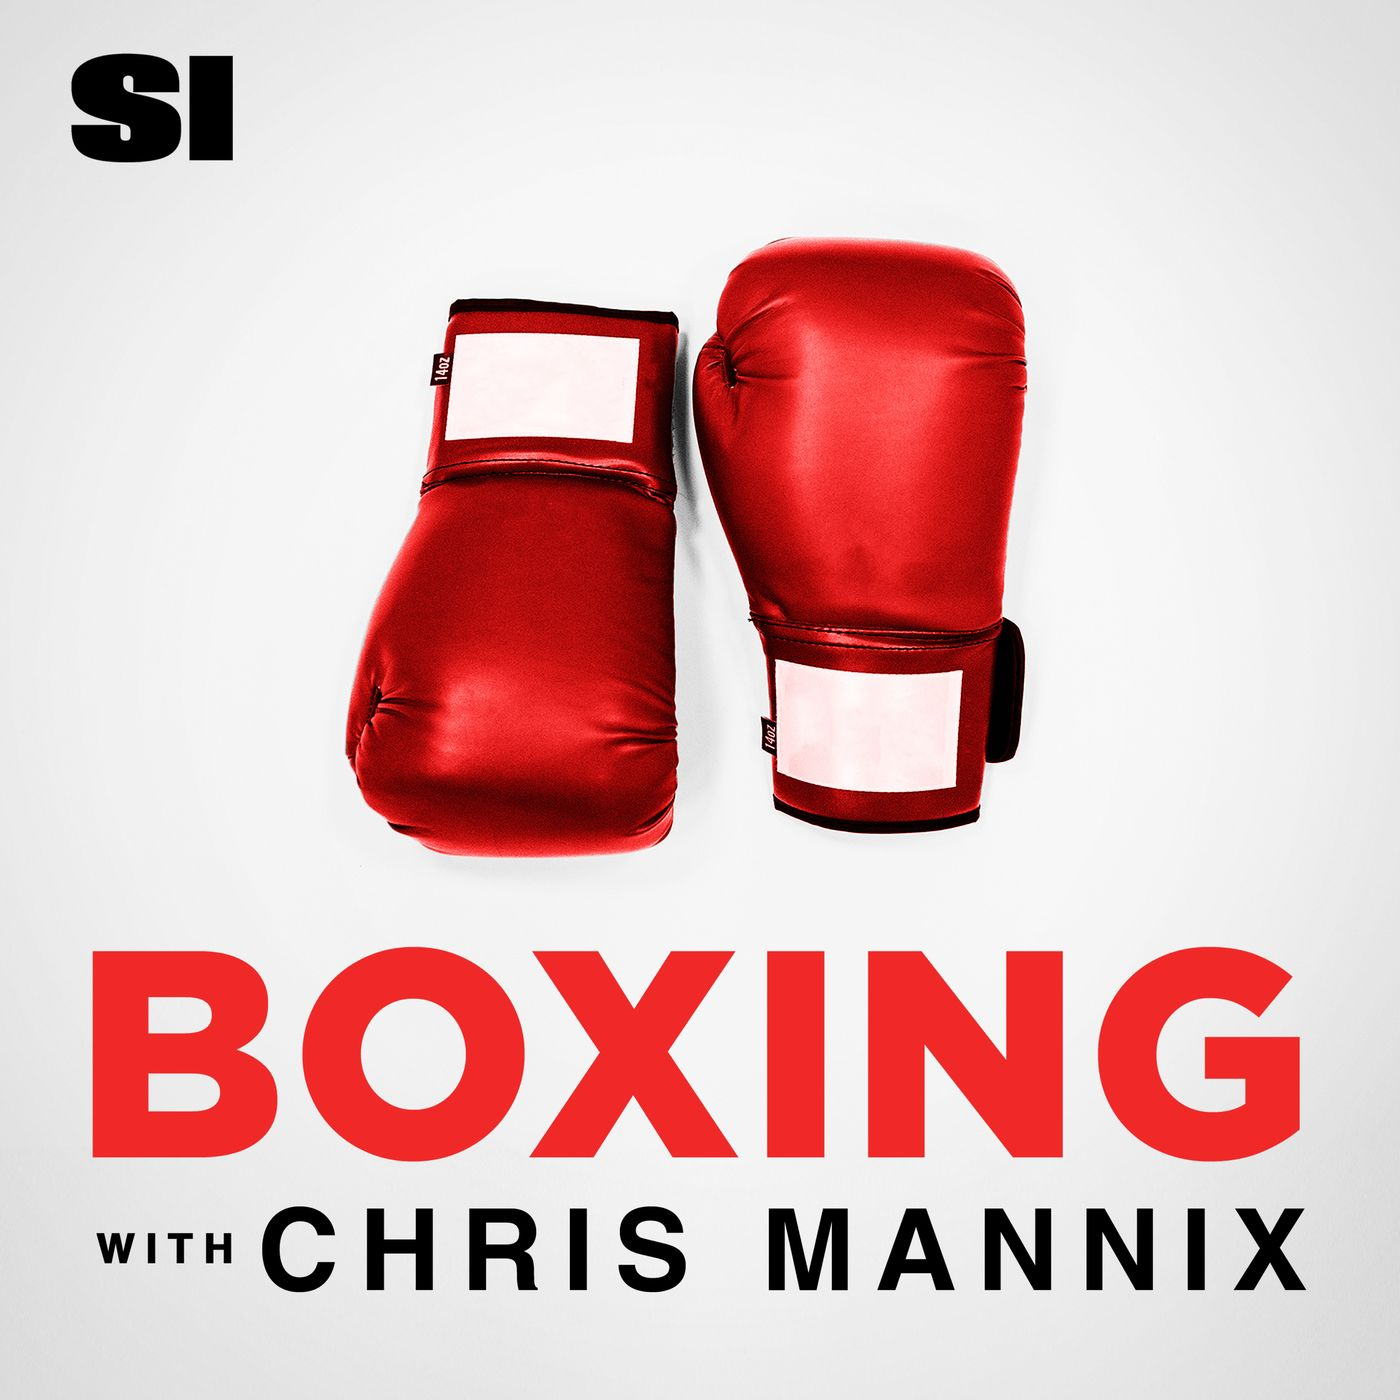 A highlight from Boxing with Chris Mannix - More Drama Surrounding Boxing